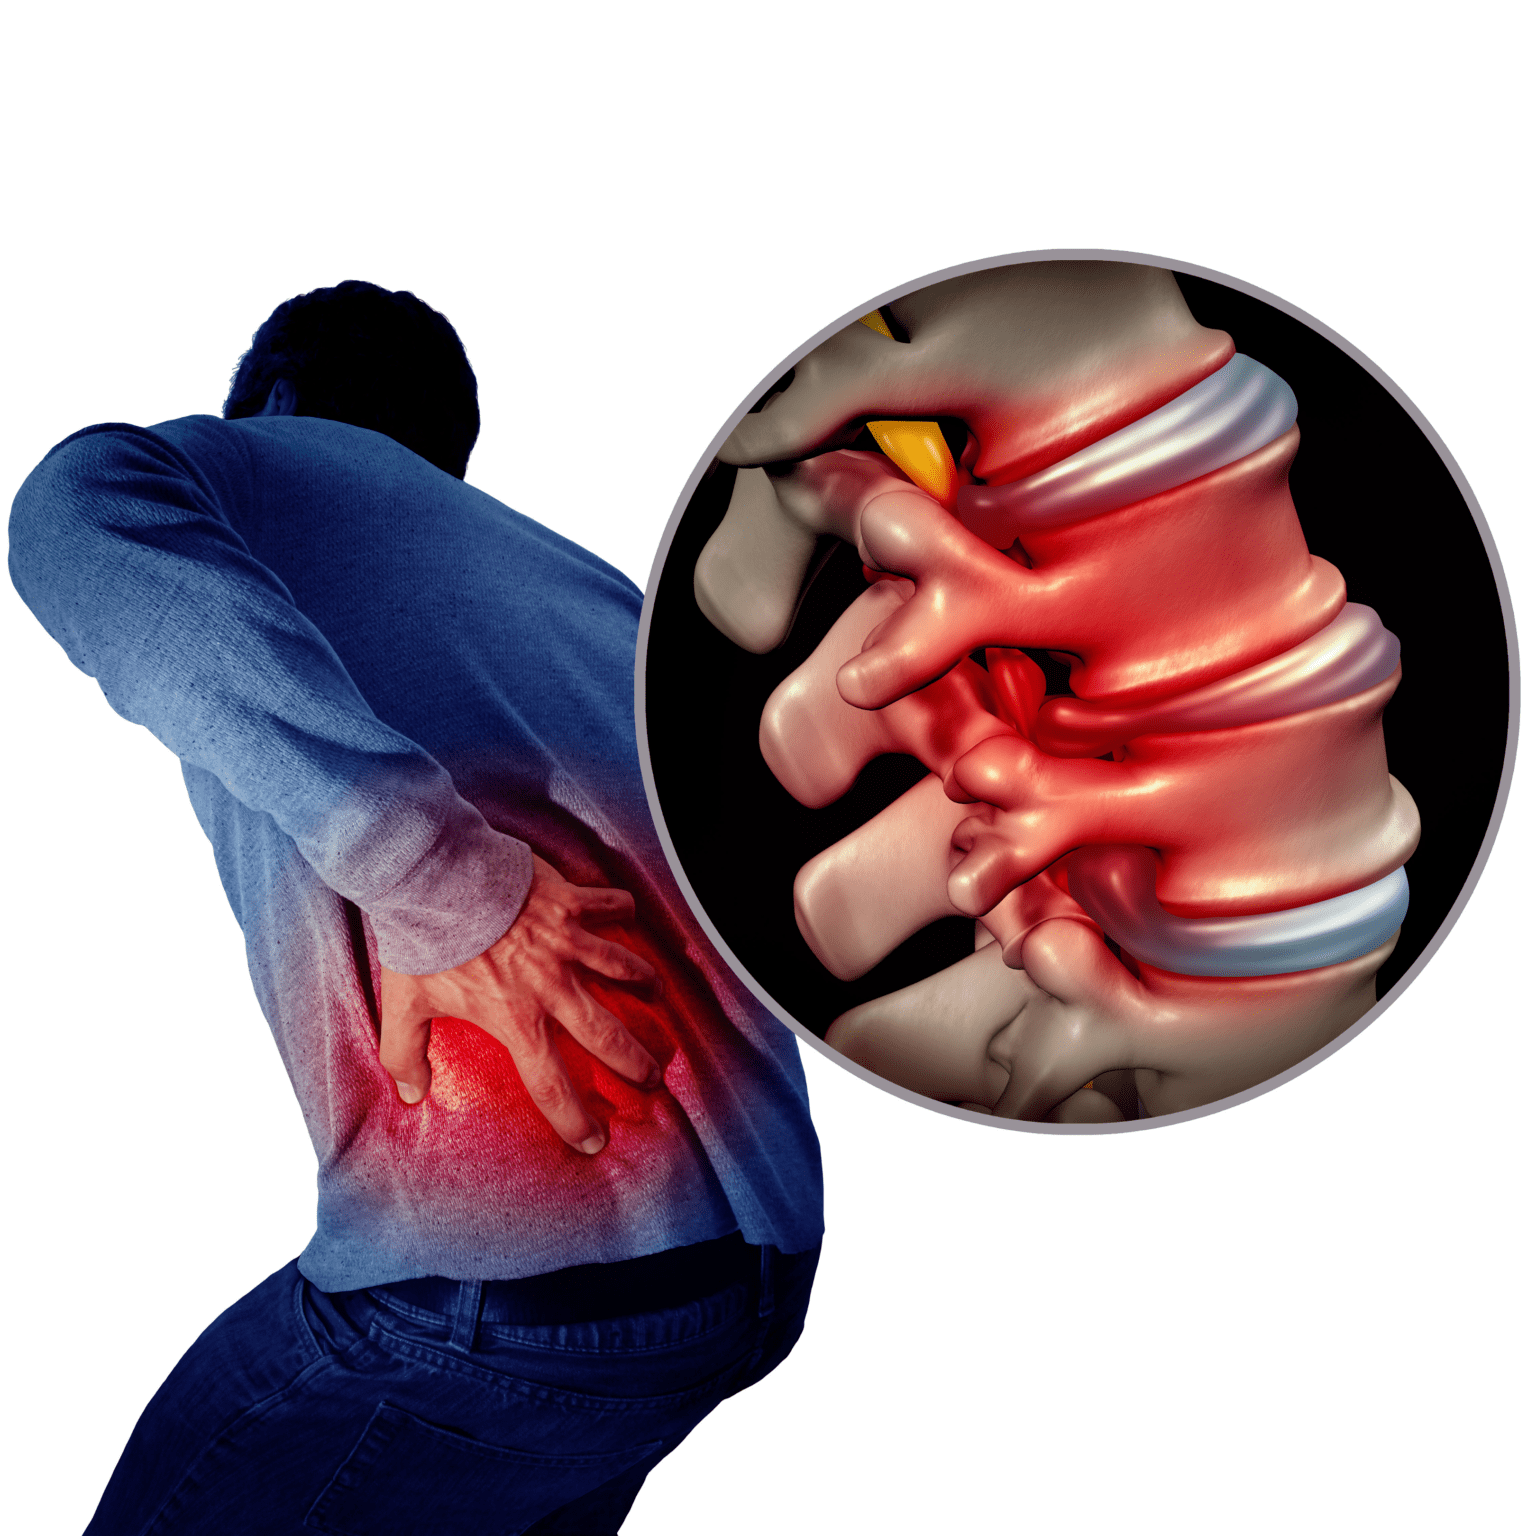 What is worse a herniated or bulging disc?